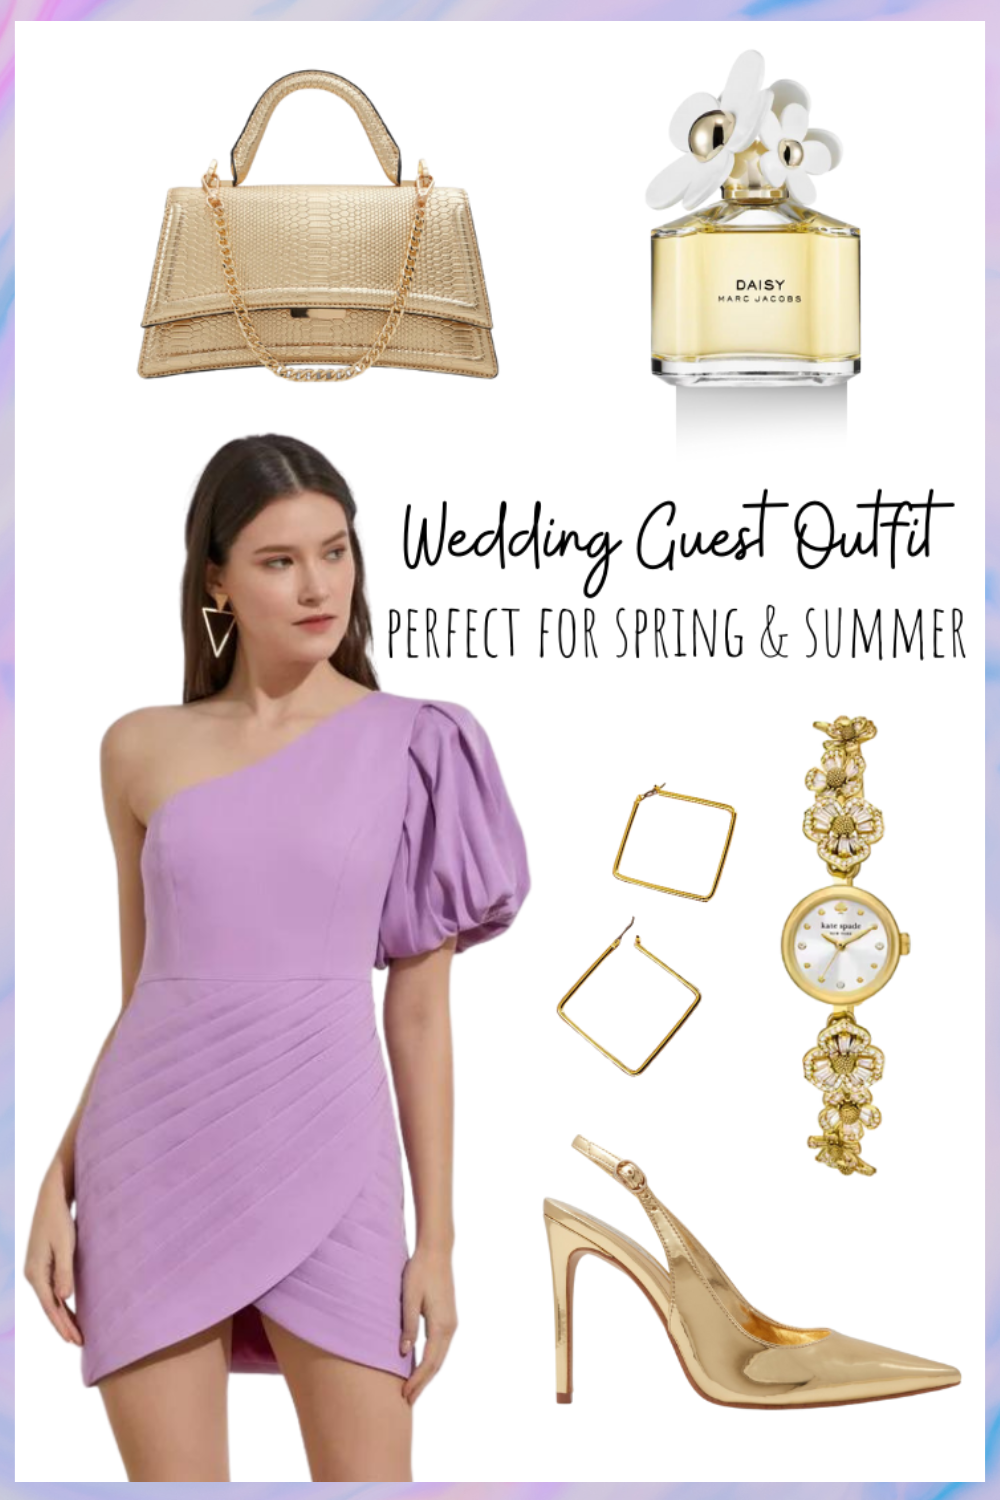 This Wedding Guest Outfit Is So Summer and Spring Worthy!